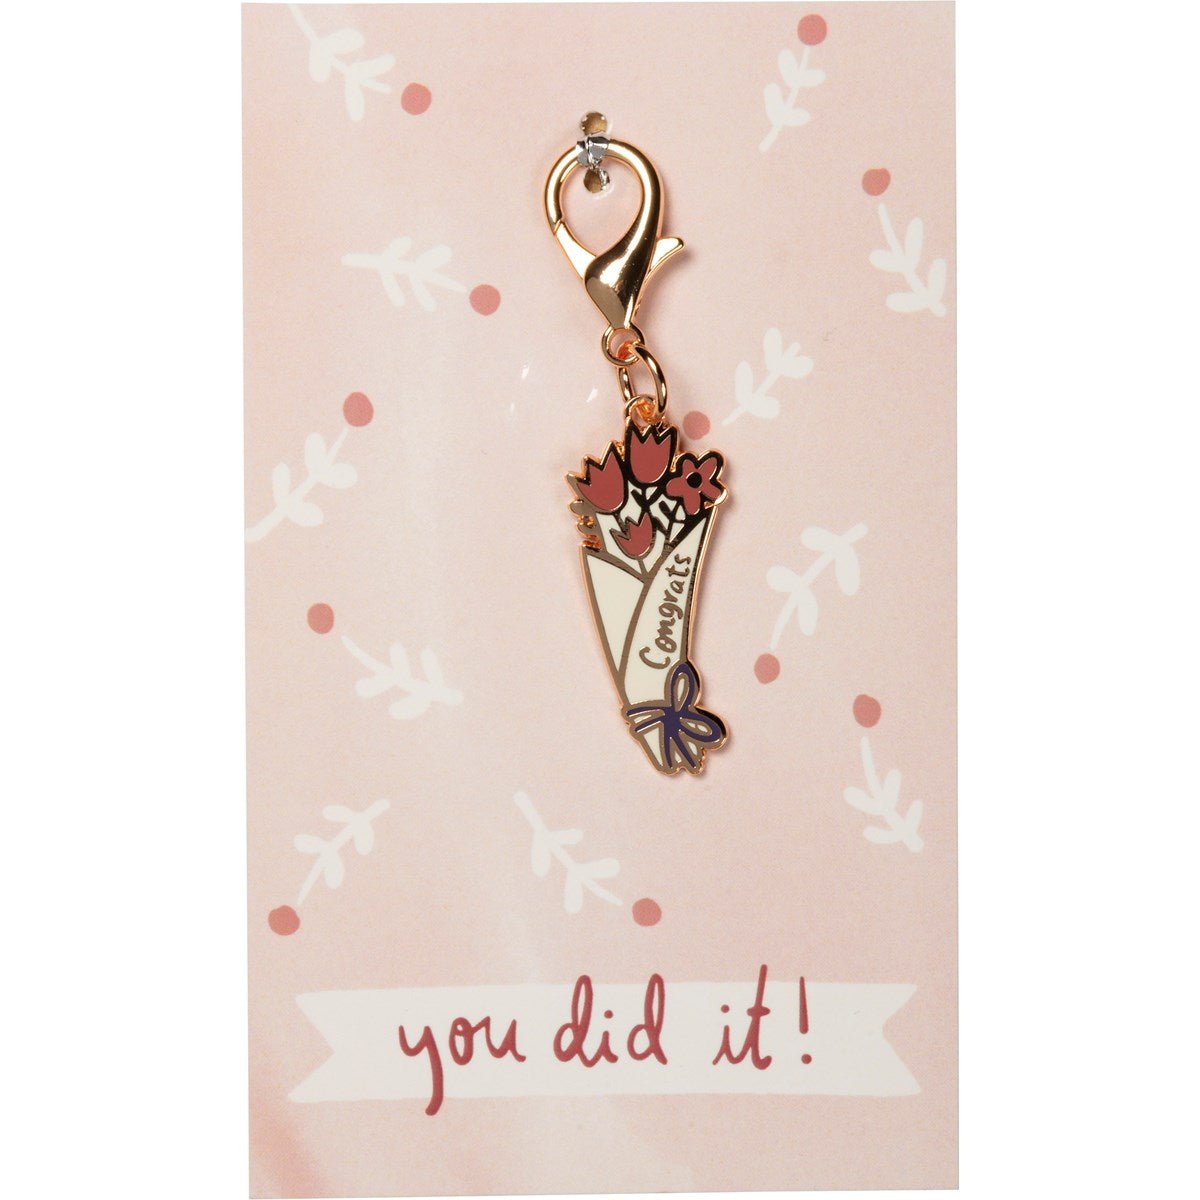 Congrats You Did It! Flower Bouquet Hard Enamel Keychain Charm | Congratulations Gift | Attach to Handbags, Backpacks, Keyrings